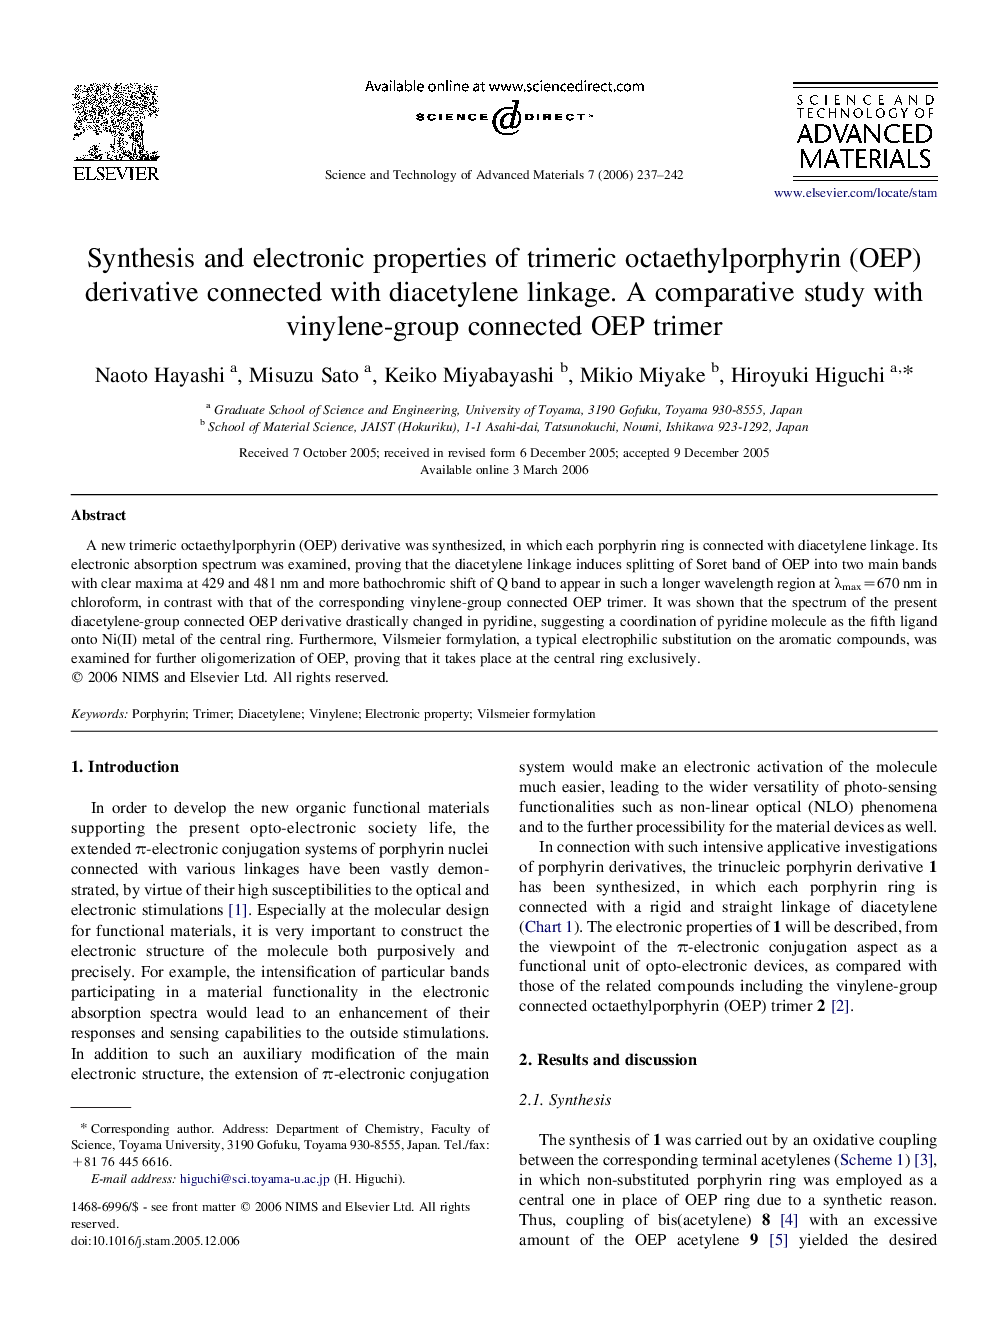 Synthesis and electronic properties of trimeric octaethylporphyrin (OEP) derivative connected with diacetylene linkage. A comparative study with vinylene-group connected OEP trimer